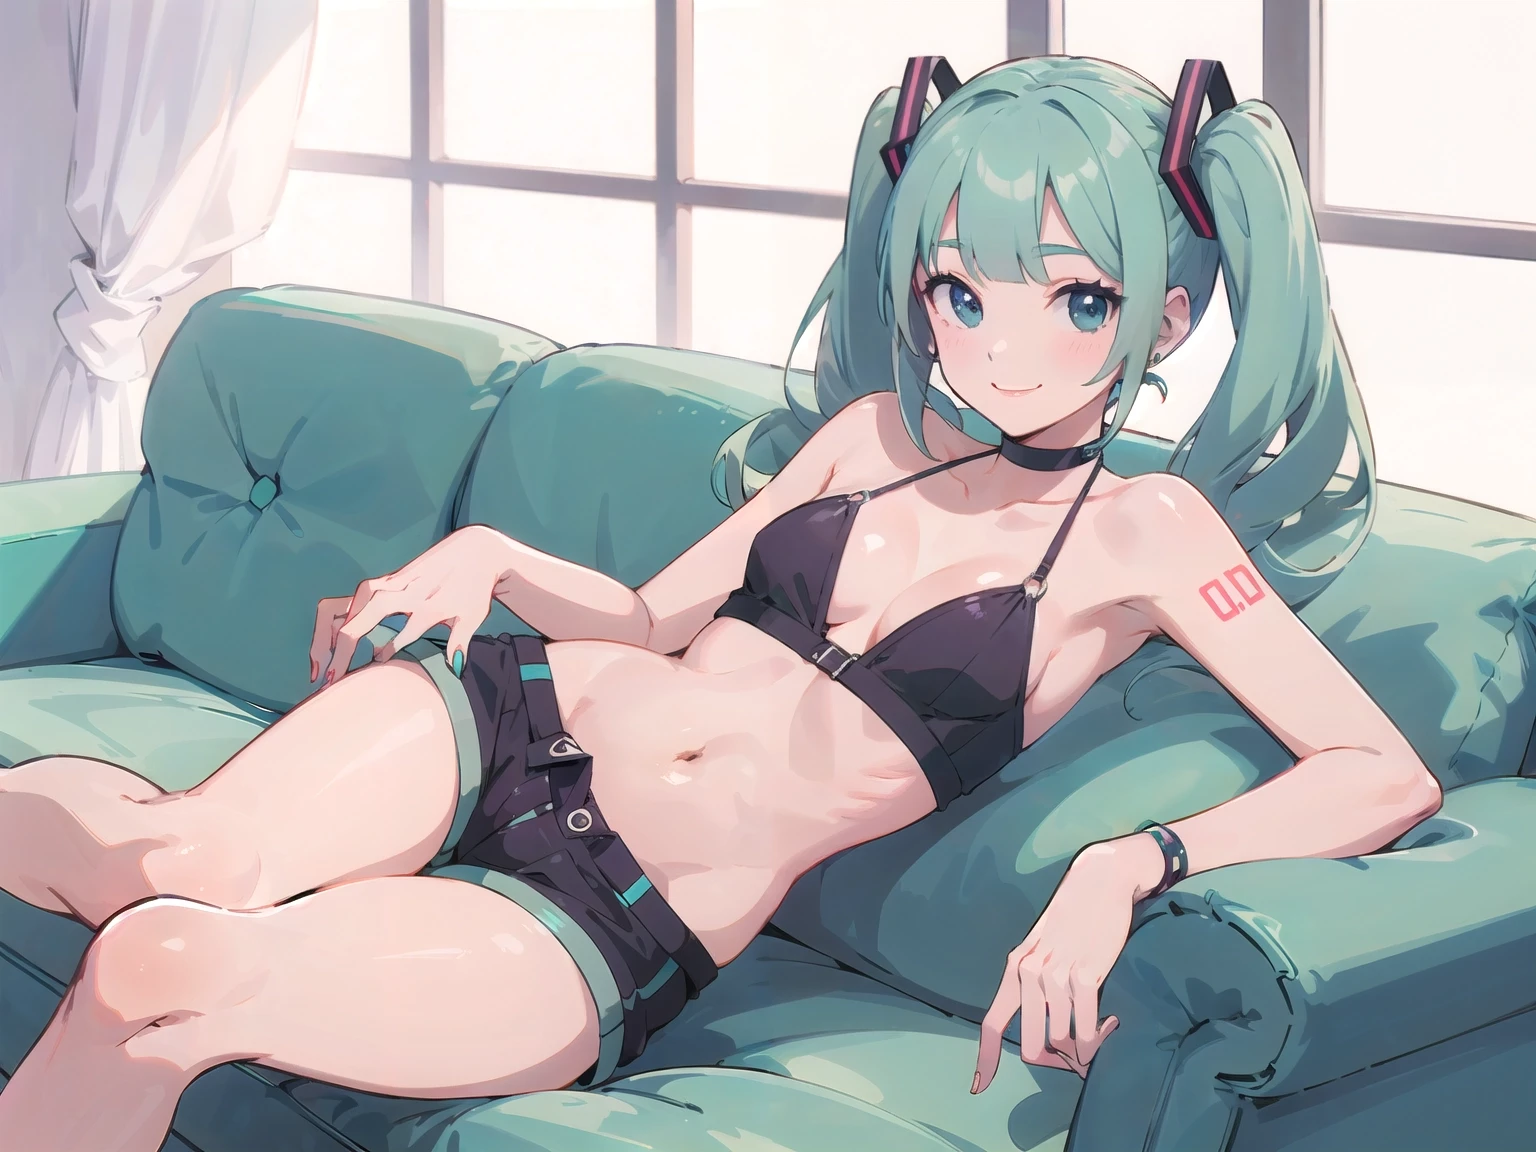 hatsune-miku-anime-style-all-ages-2-9